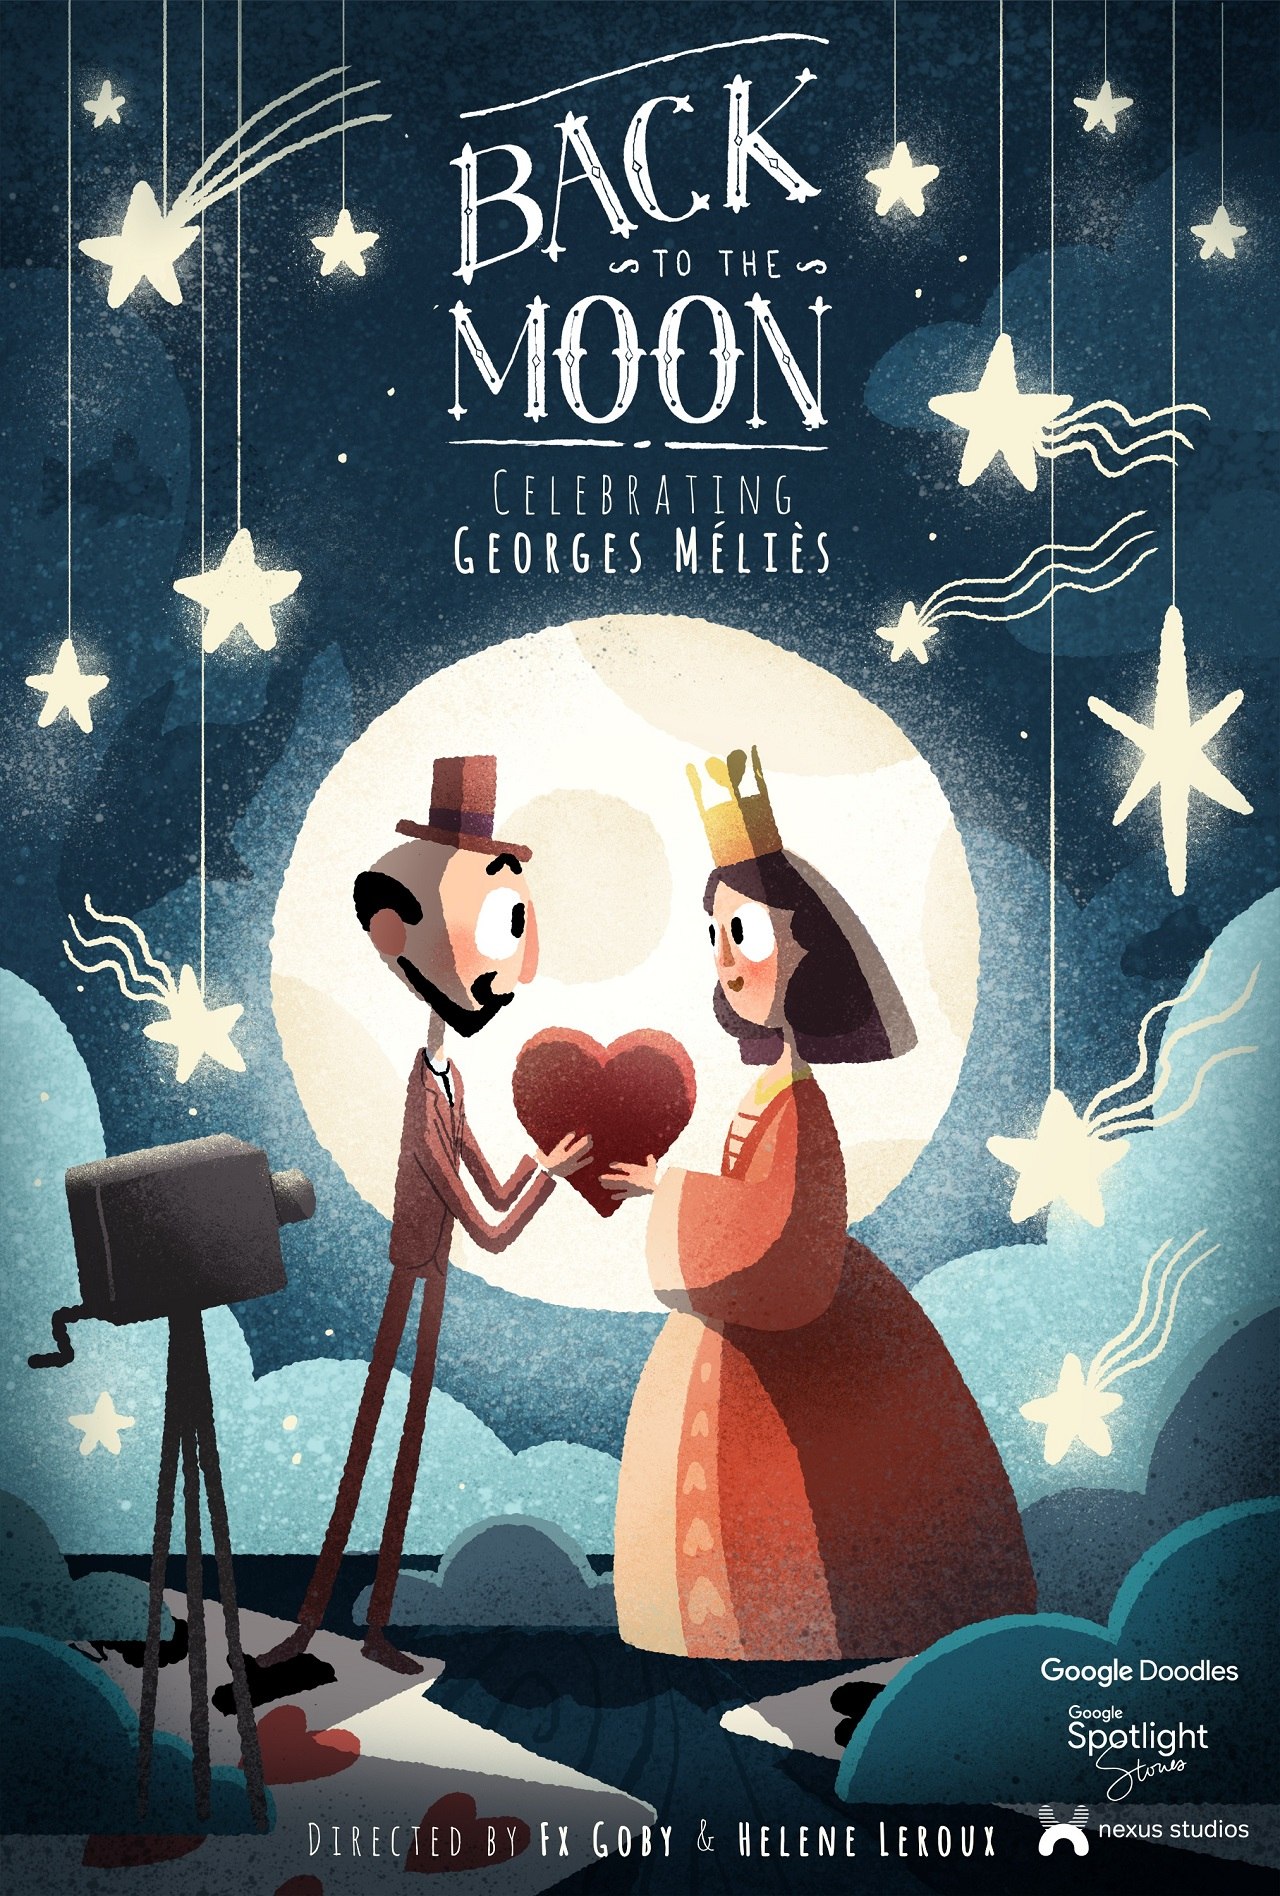 Back To The Moon Vr Doodle Celebrates Georges Melies Animation